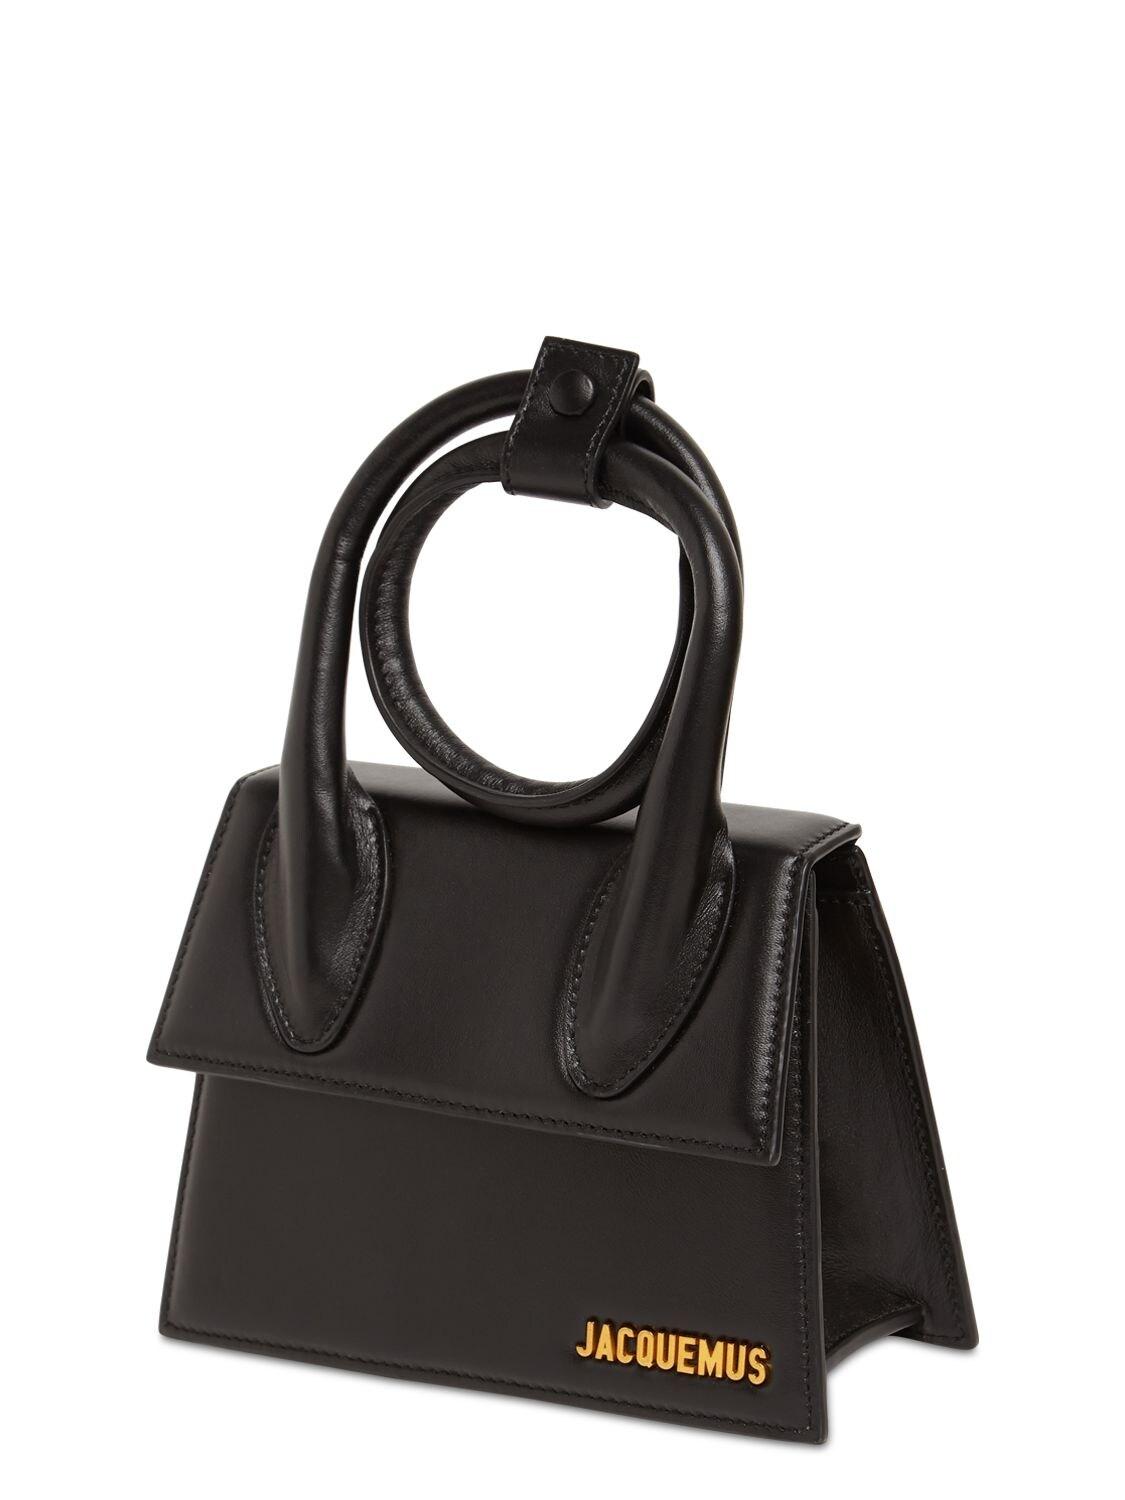 Jacquemus Le Chiquito Noeud Leather Bag in Black - Lyst